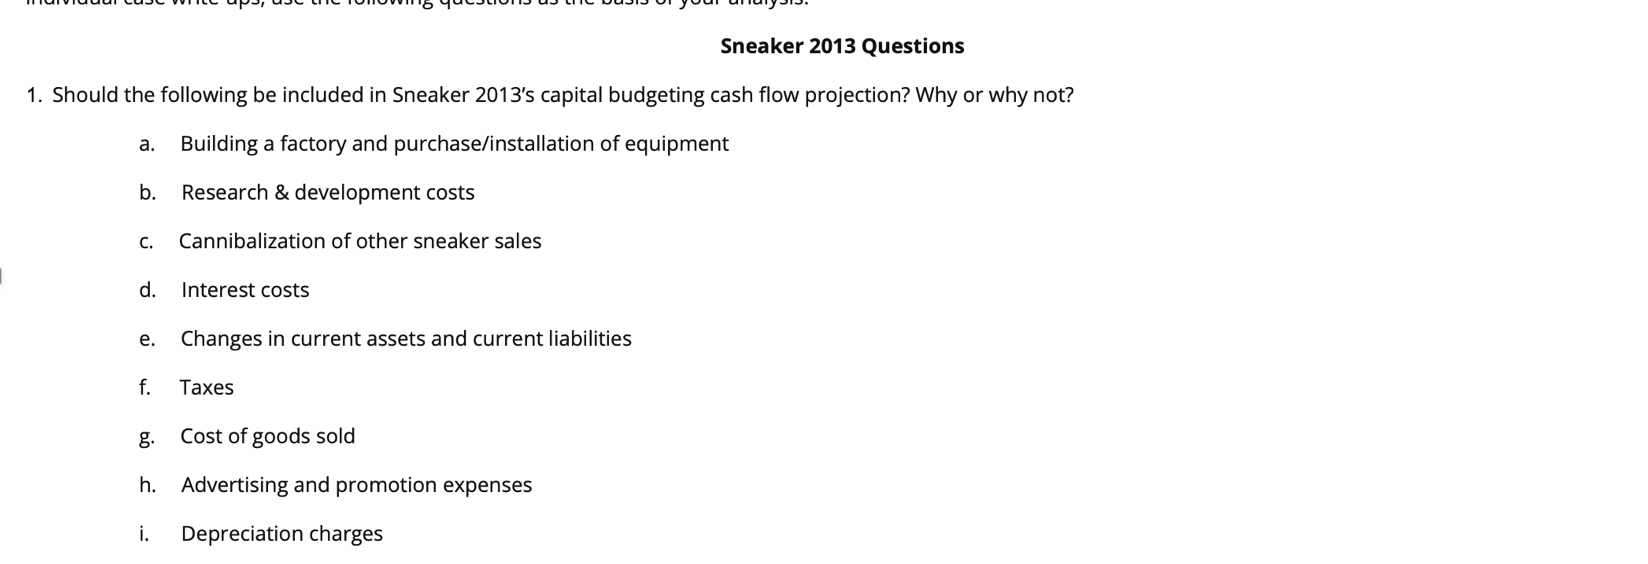 "yoar ananyPIP,
Sneaker 2013 Questions
1. Should the following be included in Sneaker 2013's capital budgeting cash flow projection? Why or why not?
Building a factory and purchase/installation of equipment
а.
Research & development costs
b.
Cannibalization of other sneaker sales
с.
d.
Interest costs
Changes in current assets and current liabilities
е.
f
Таxes
Cost of goods sold
Advertising and promotion expenses
h.
i.
Depreciation charges
